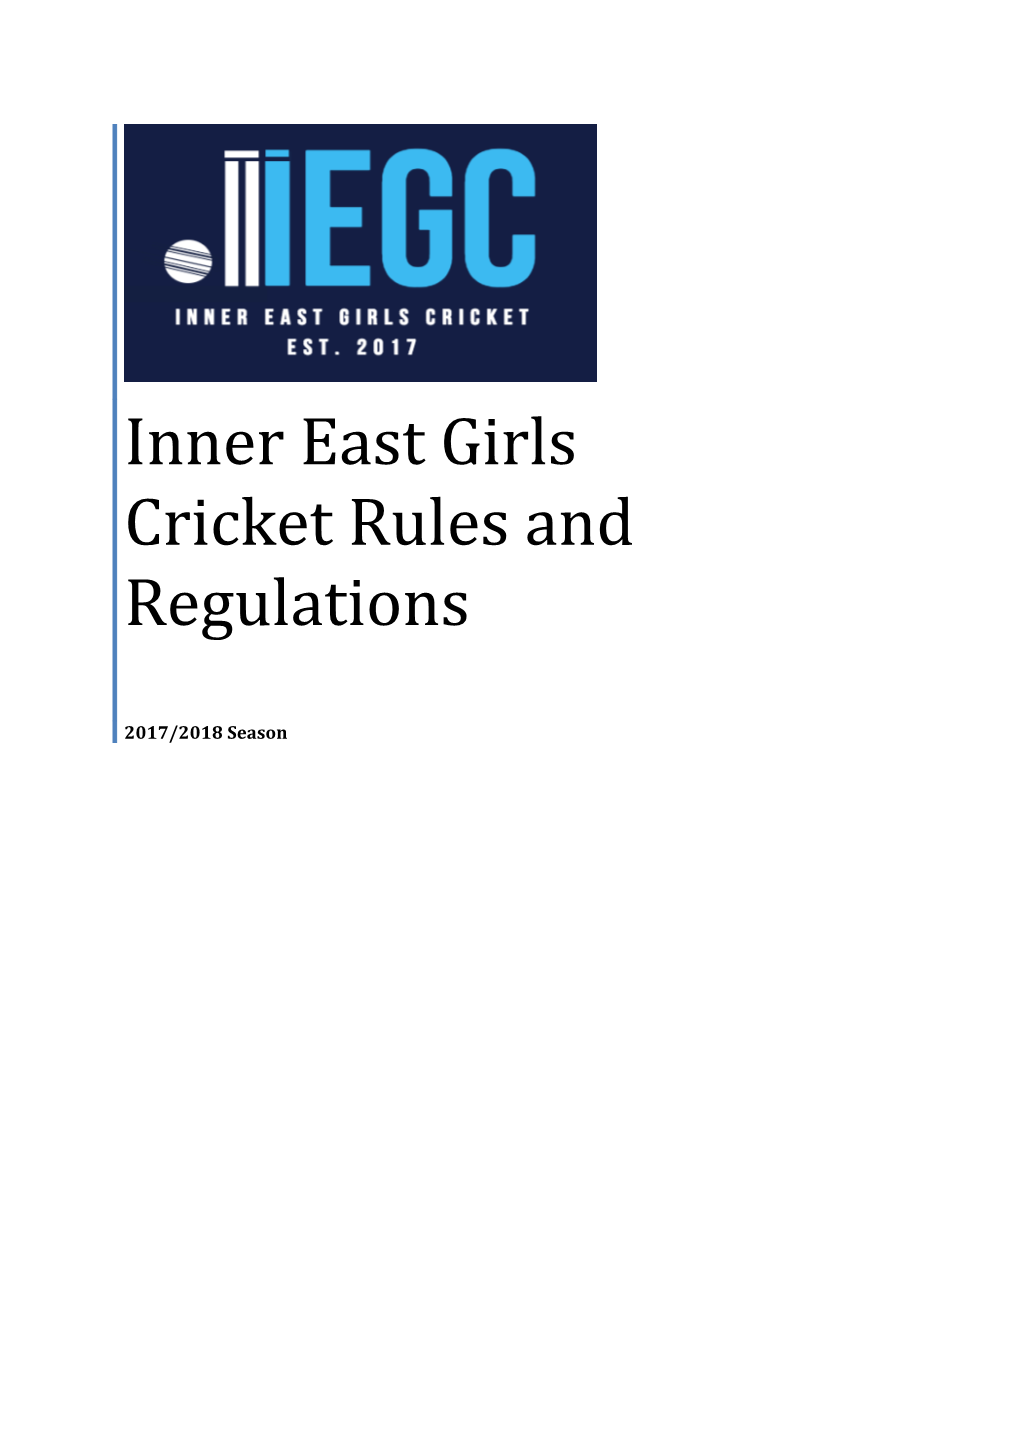 Inner East Girls Cricket Rules and Regulations